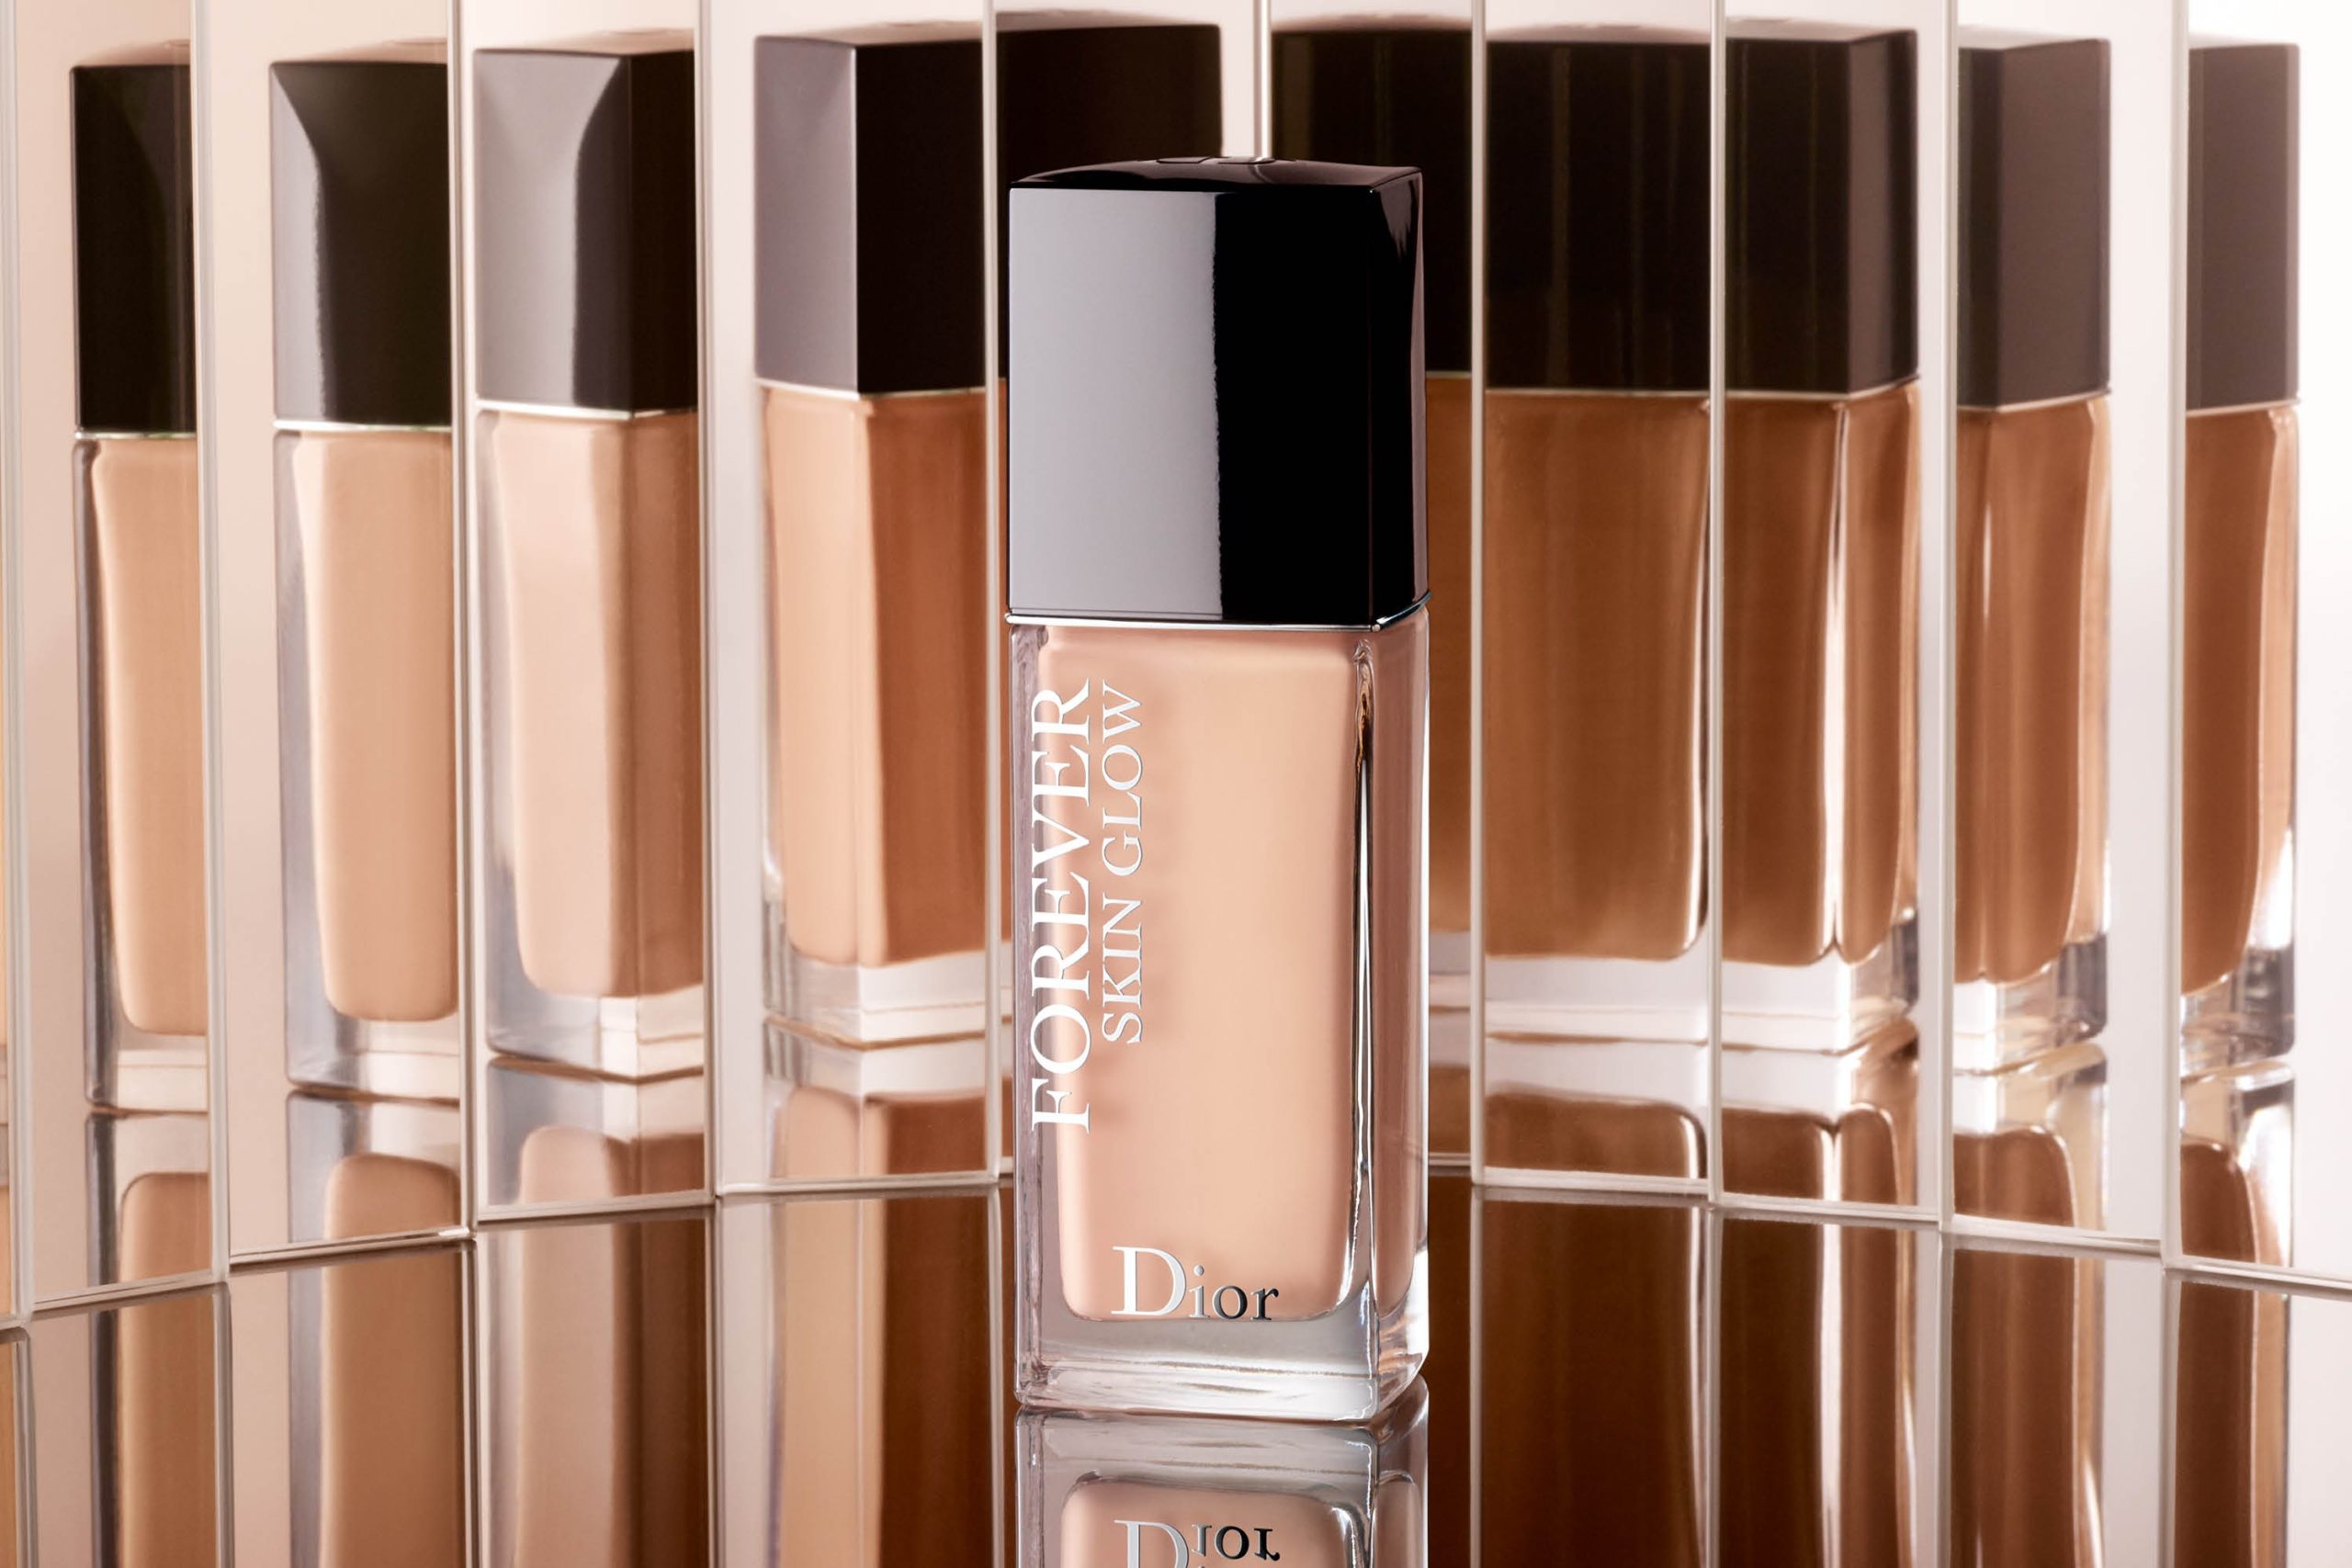 Best New Foundations, Swatches, Photos, Makeup Trends 2019, 2020: Get Glowing Skin, Dior Beauty, Forever Skin Glow Foundation, Long-Wear, Velvet Matte Finish